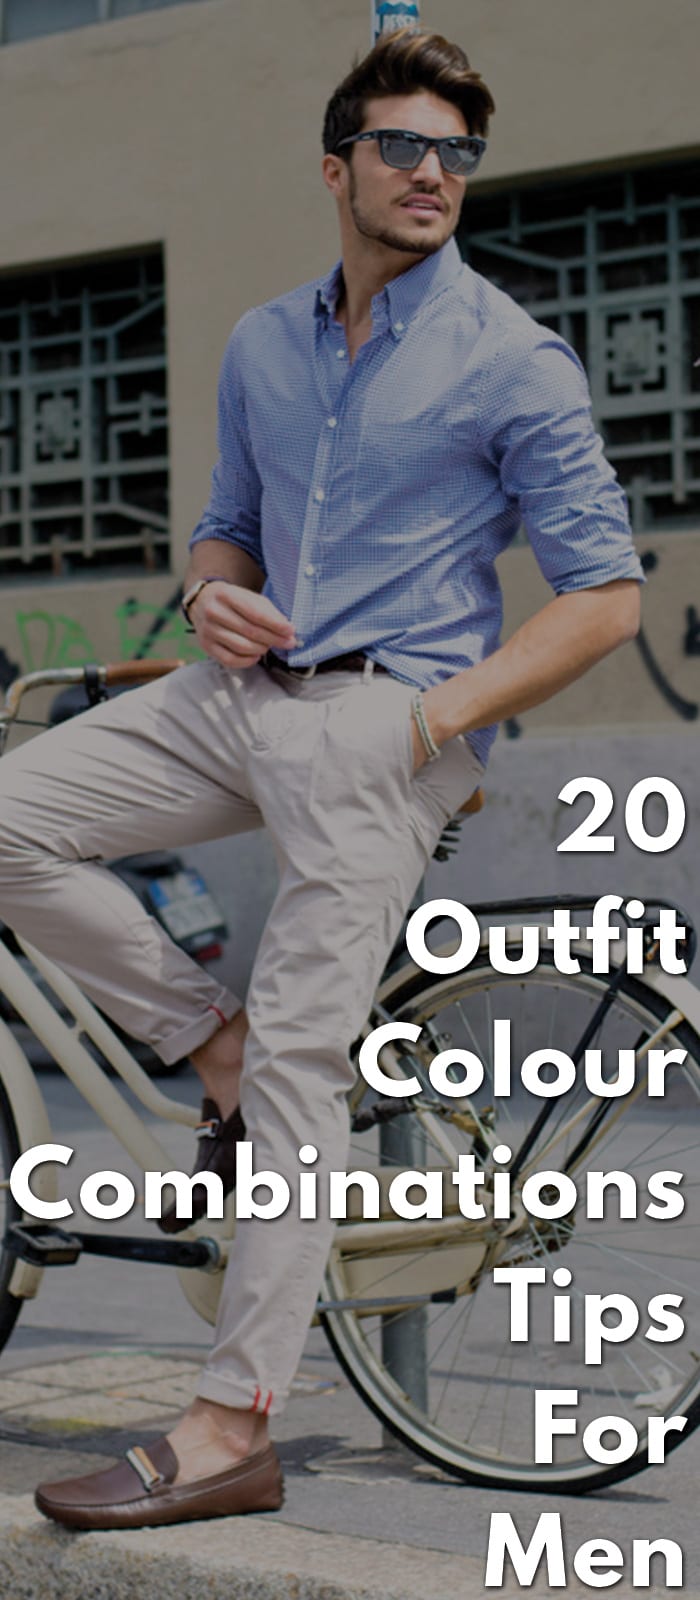 20-Outfit-Colour-Combinations-Tips-For-Men..